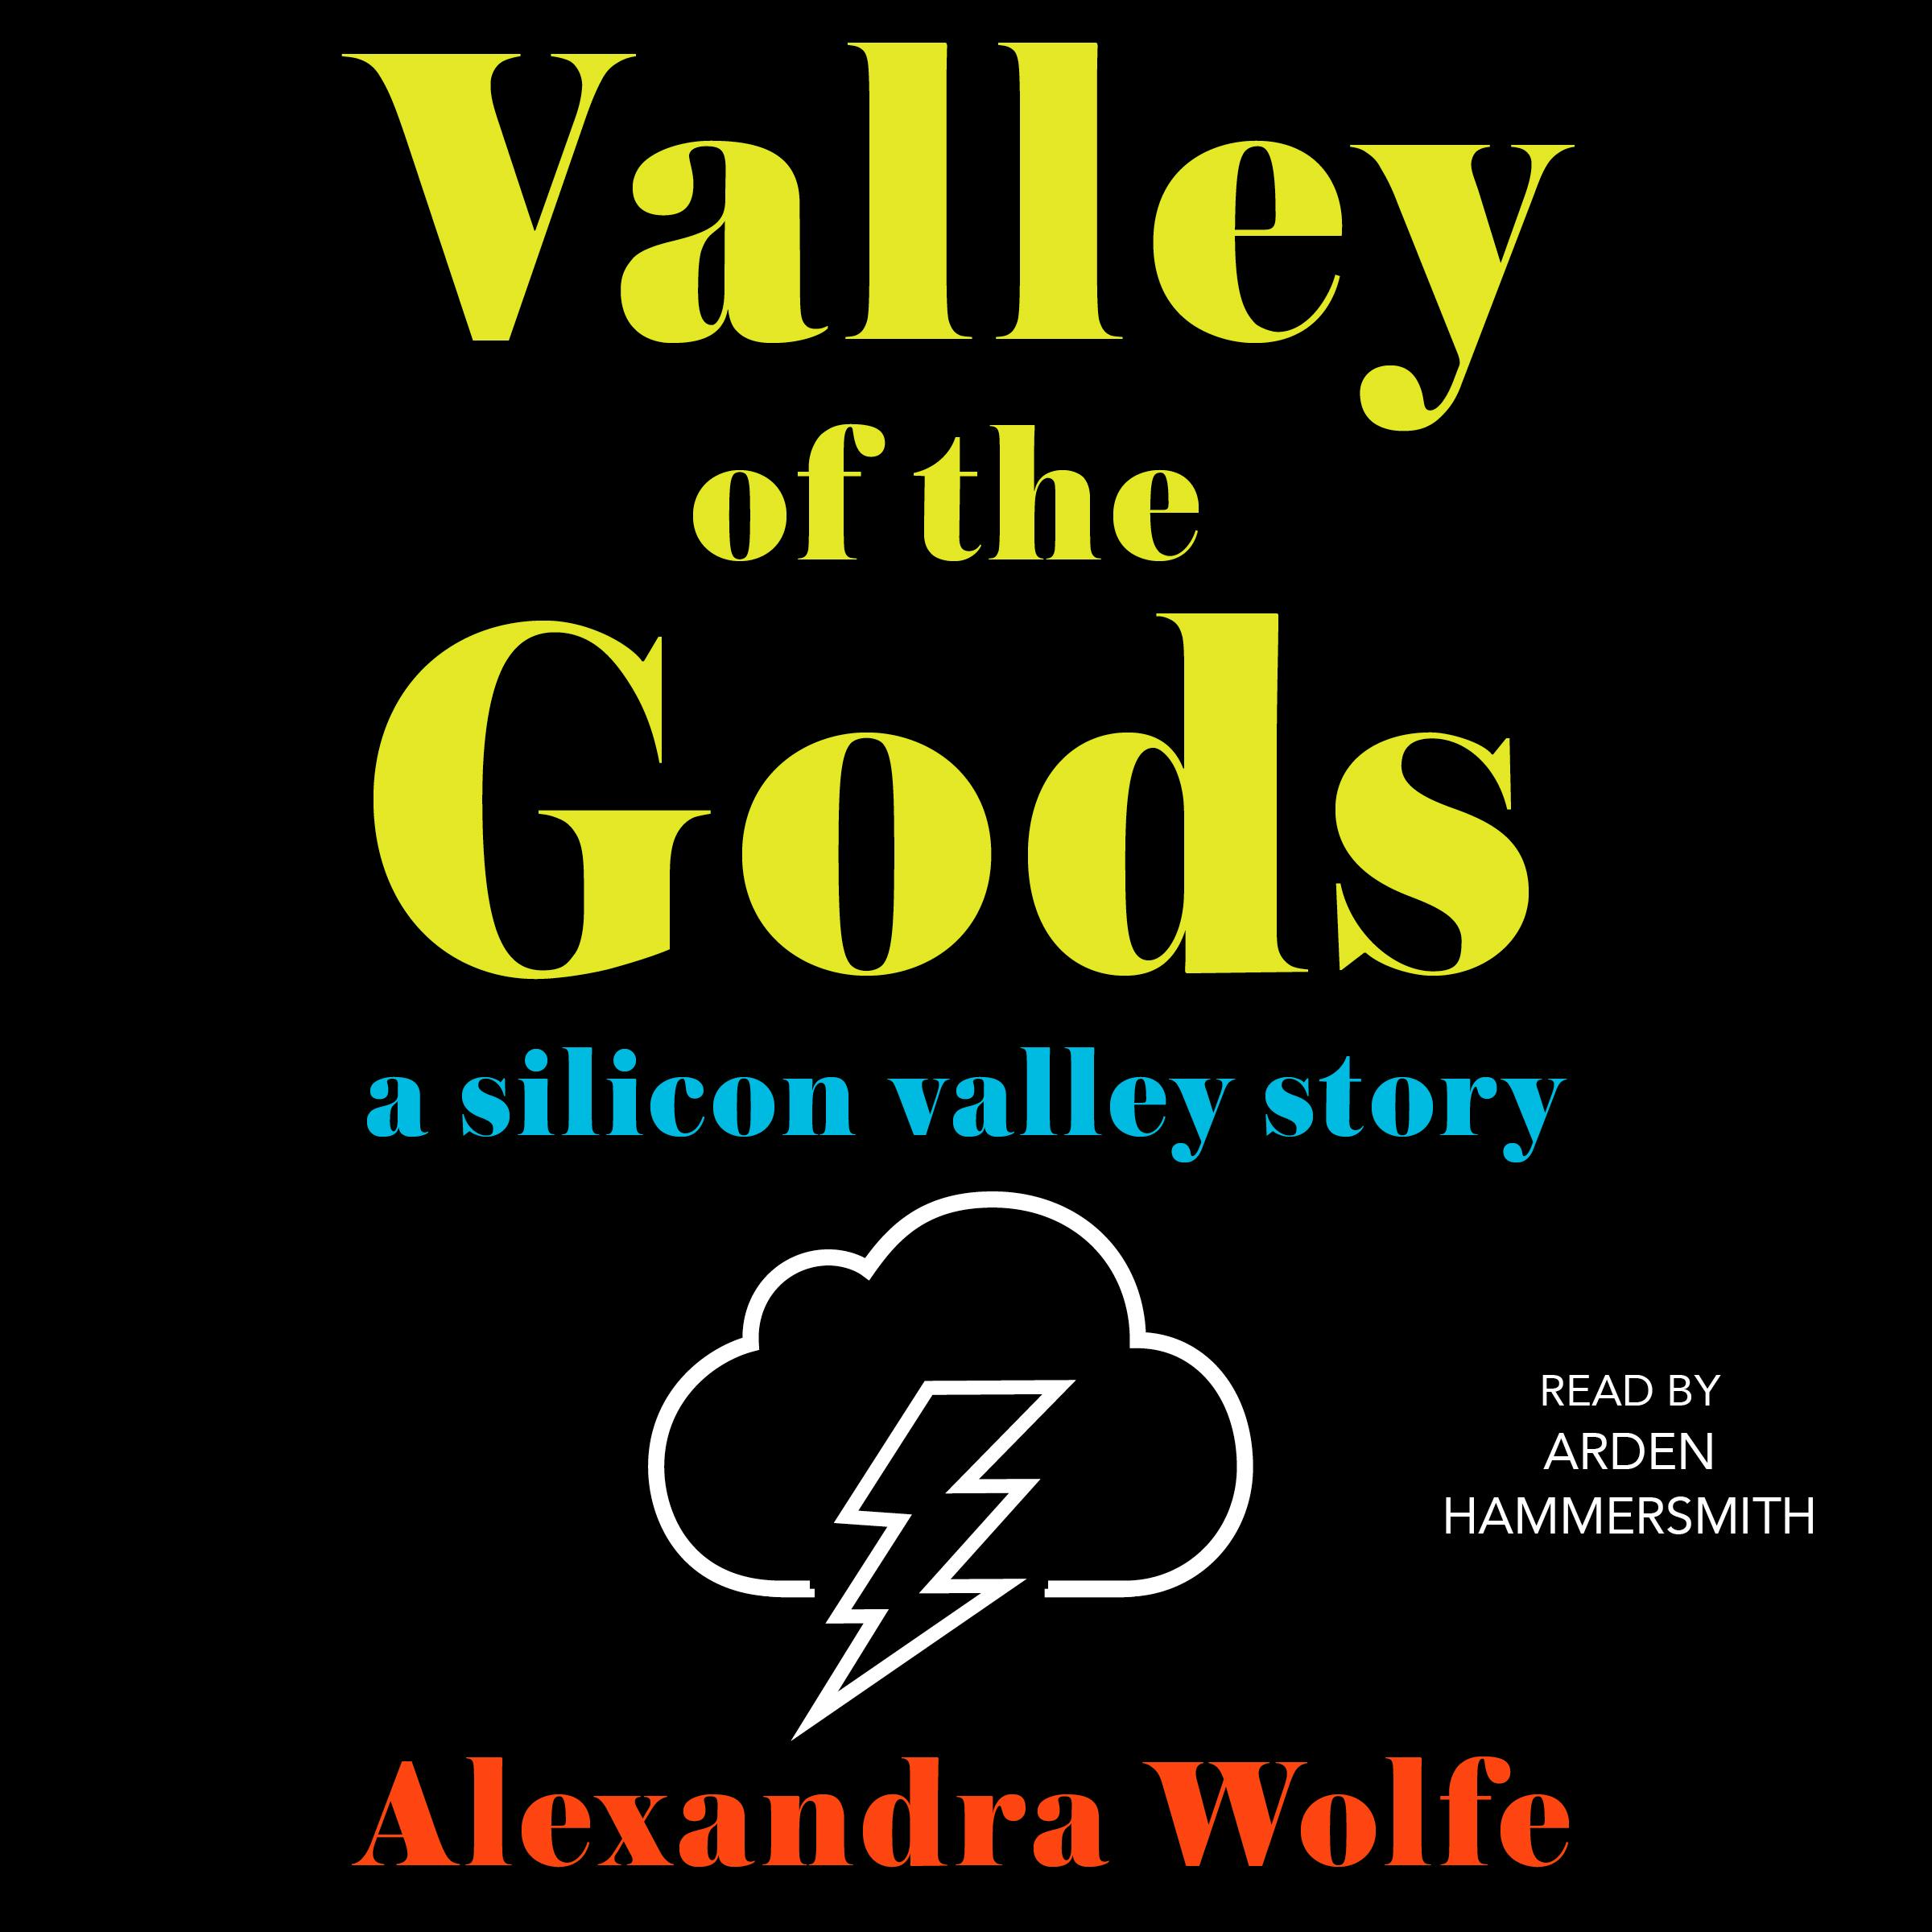 The Valley of the Gods: A Silicon Valley Story - Alexandra Wolfe